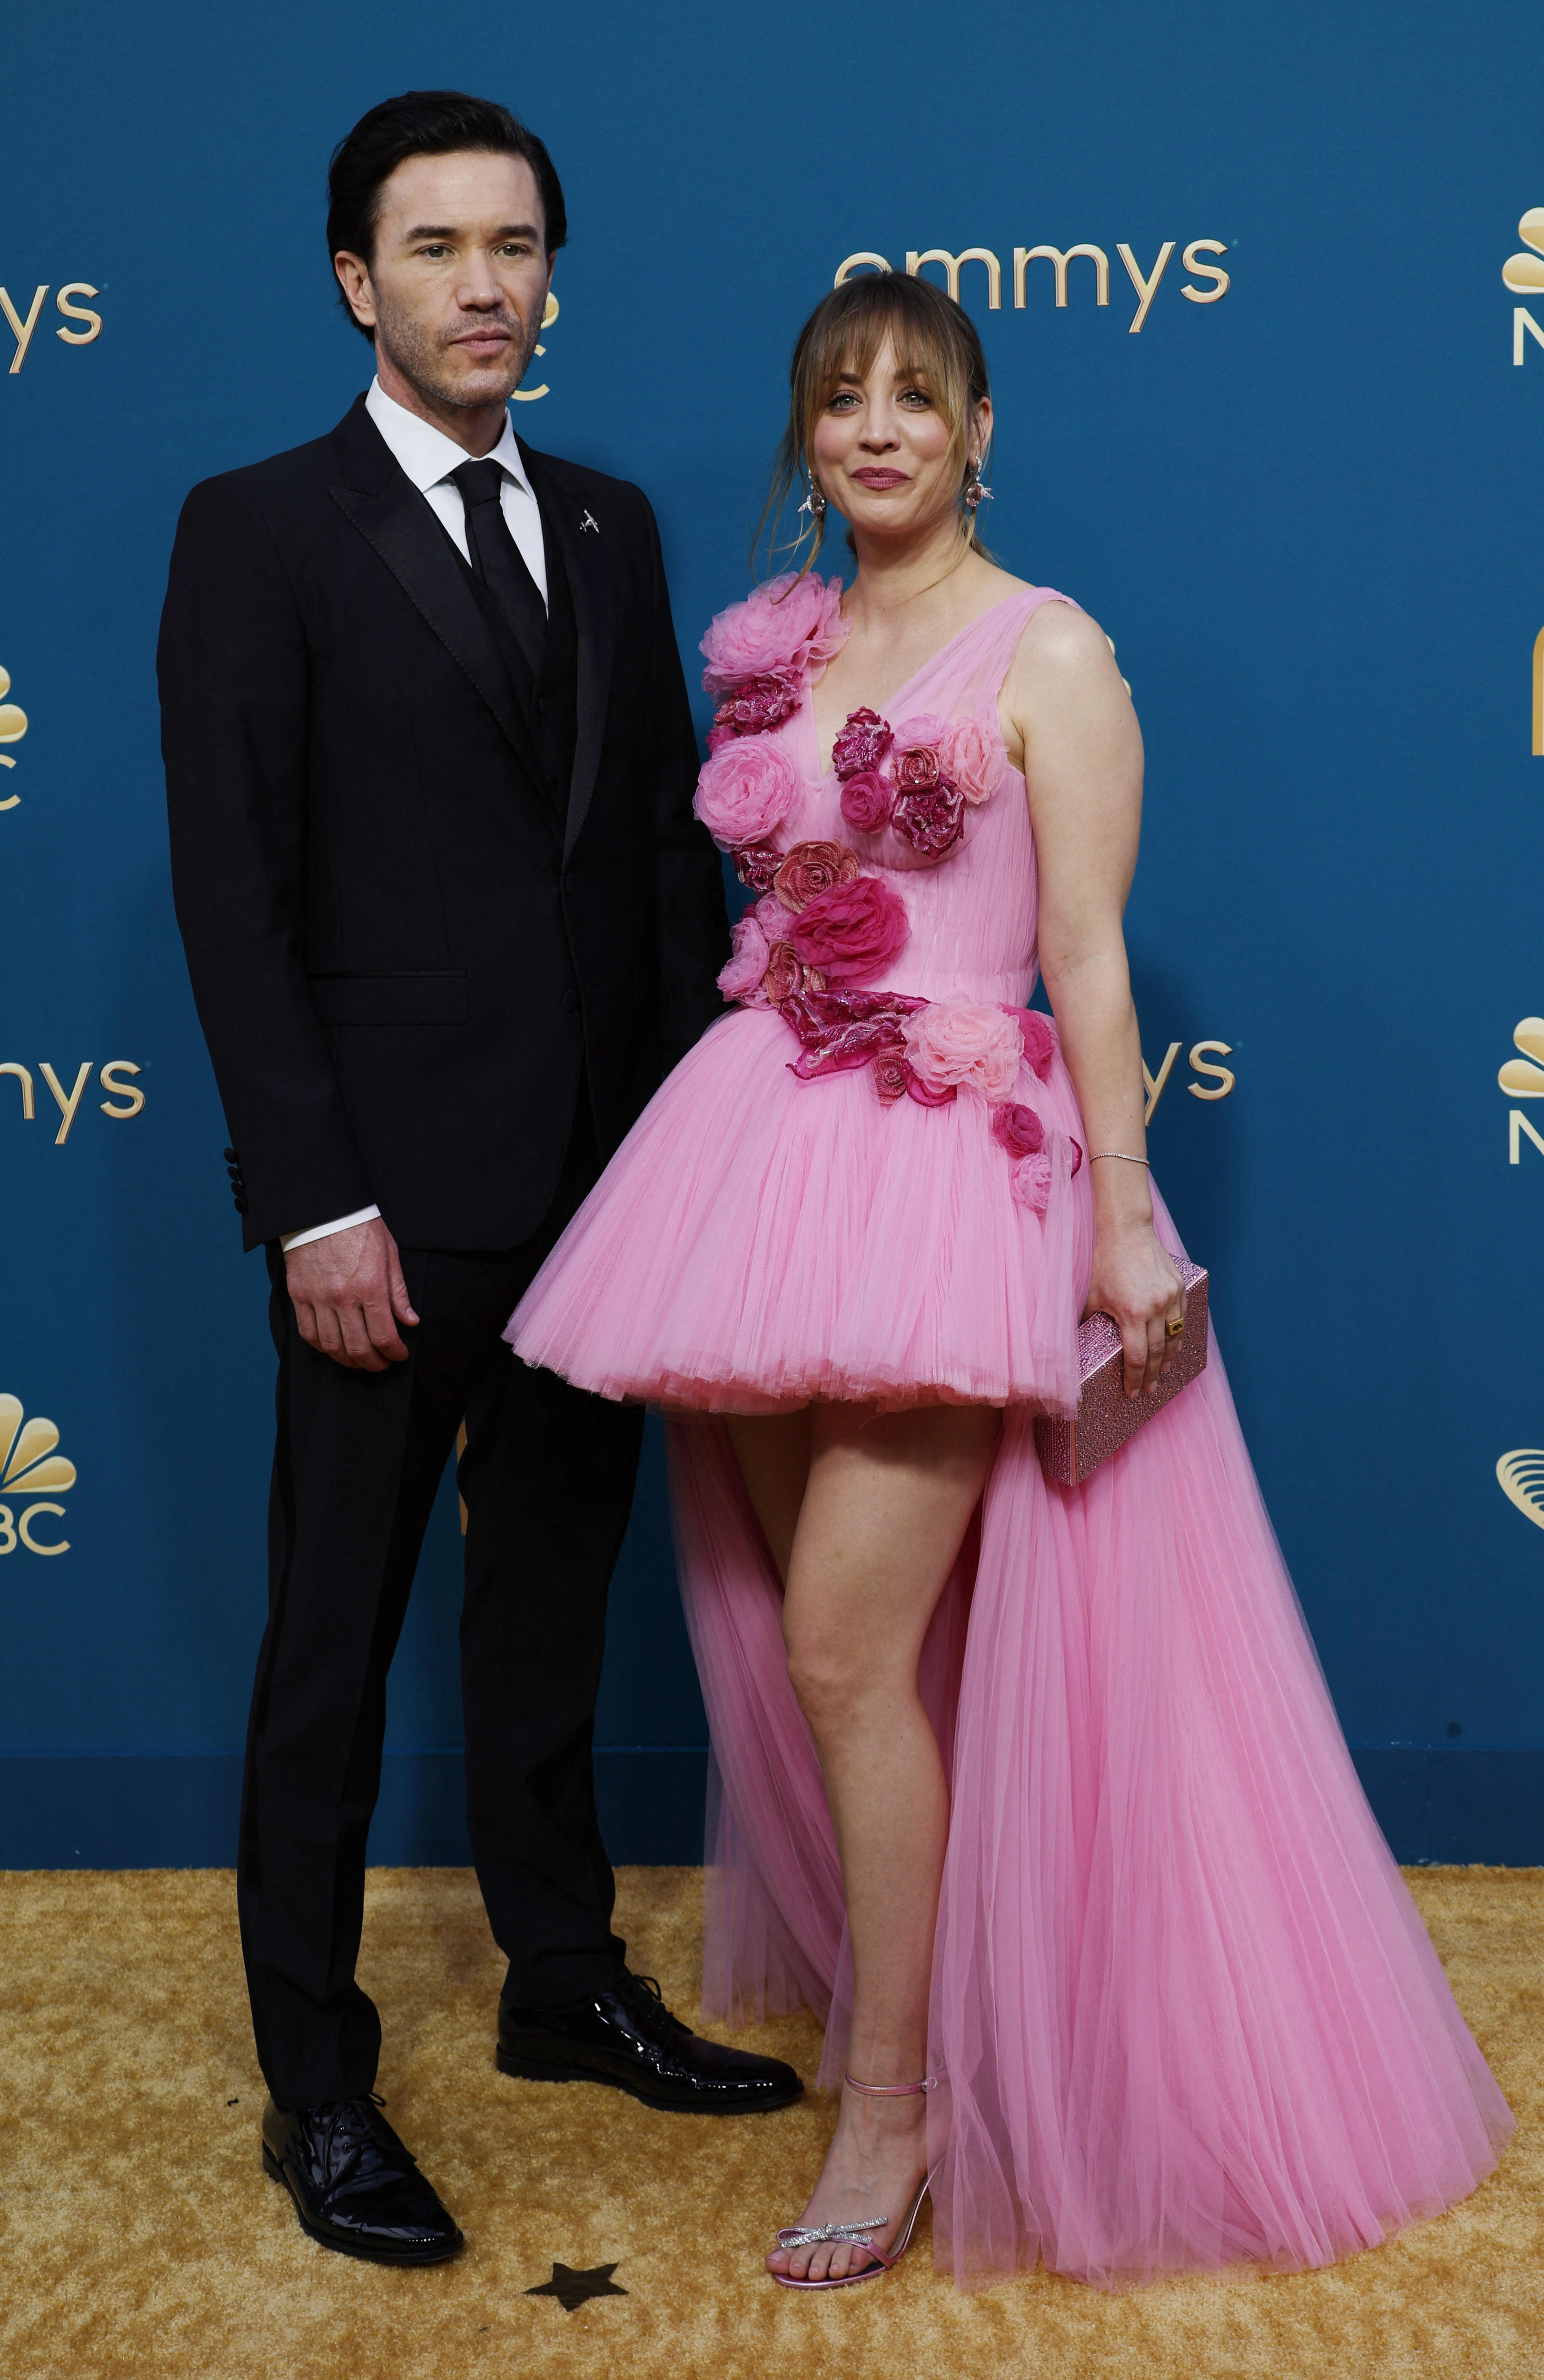 Tom Pelphrey wears a black suit and Kaley Cuoco wears a pink tulle dress with a short tutu-like skit and a floor-length train 